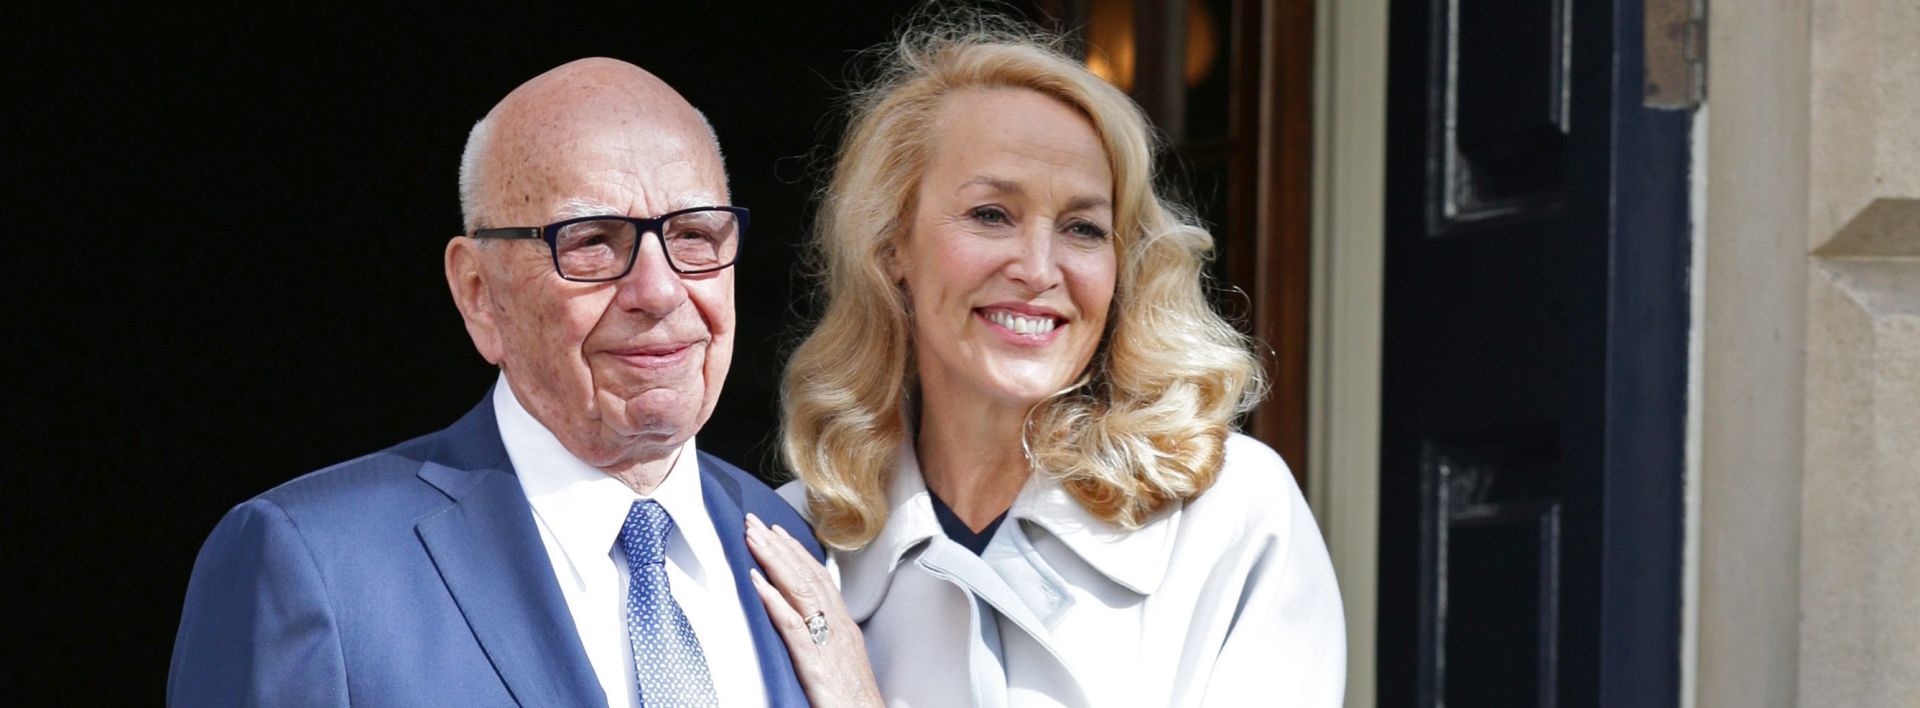 epa05194368 Australian media mogul Rupert Murdoch and Australian model Jerry Hall leave the Spencer House after getting married in London, Britain, 04 March 2016.  EPA/YUI MOK / PA UK AND IRELAND OUT